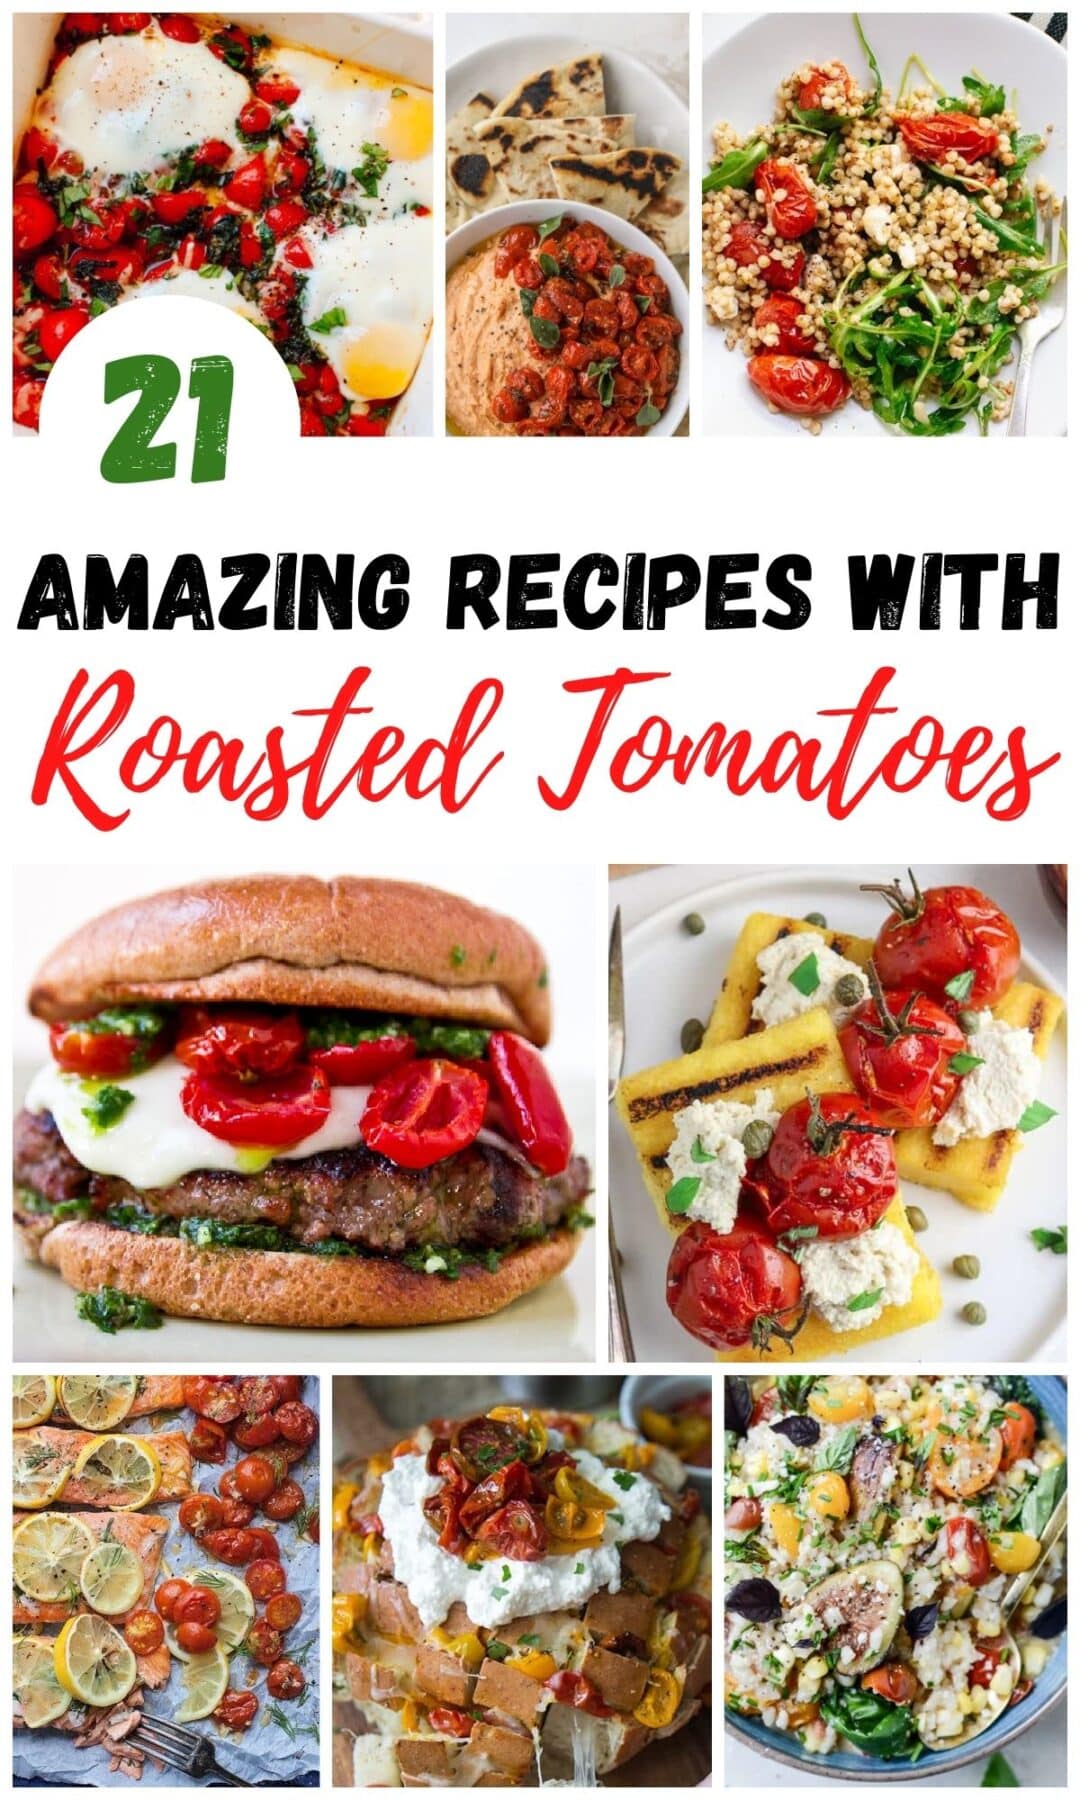 Graphic with several roasted tomatoes recipes that says 21 amazing recipes with roasted tomatoes.